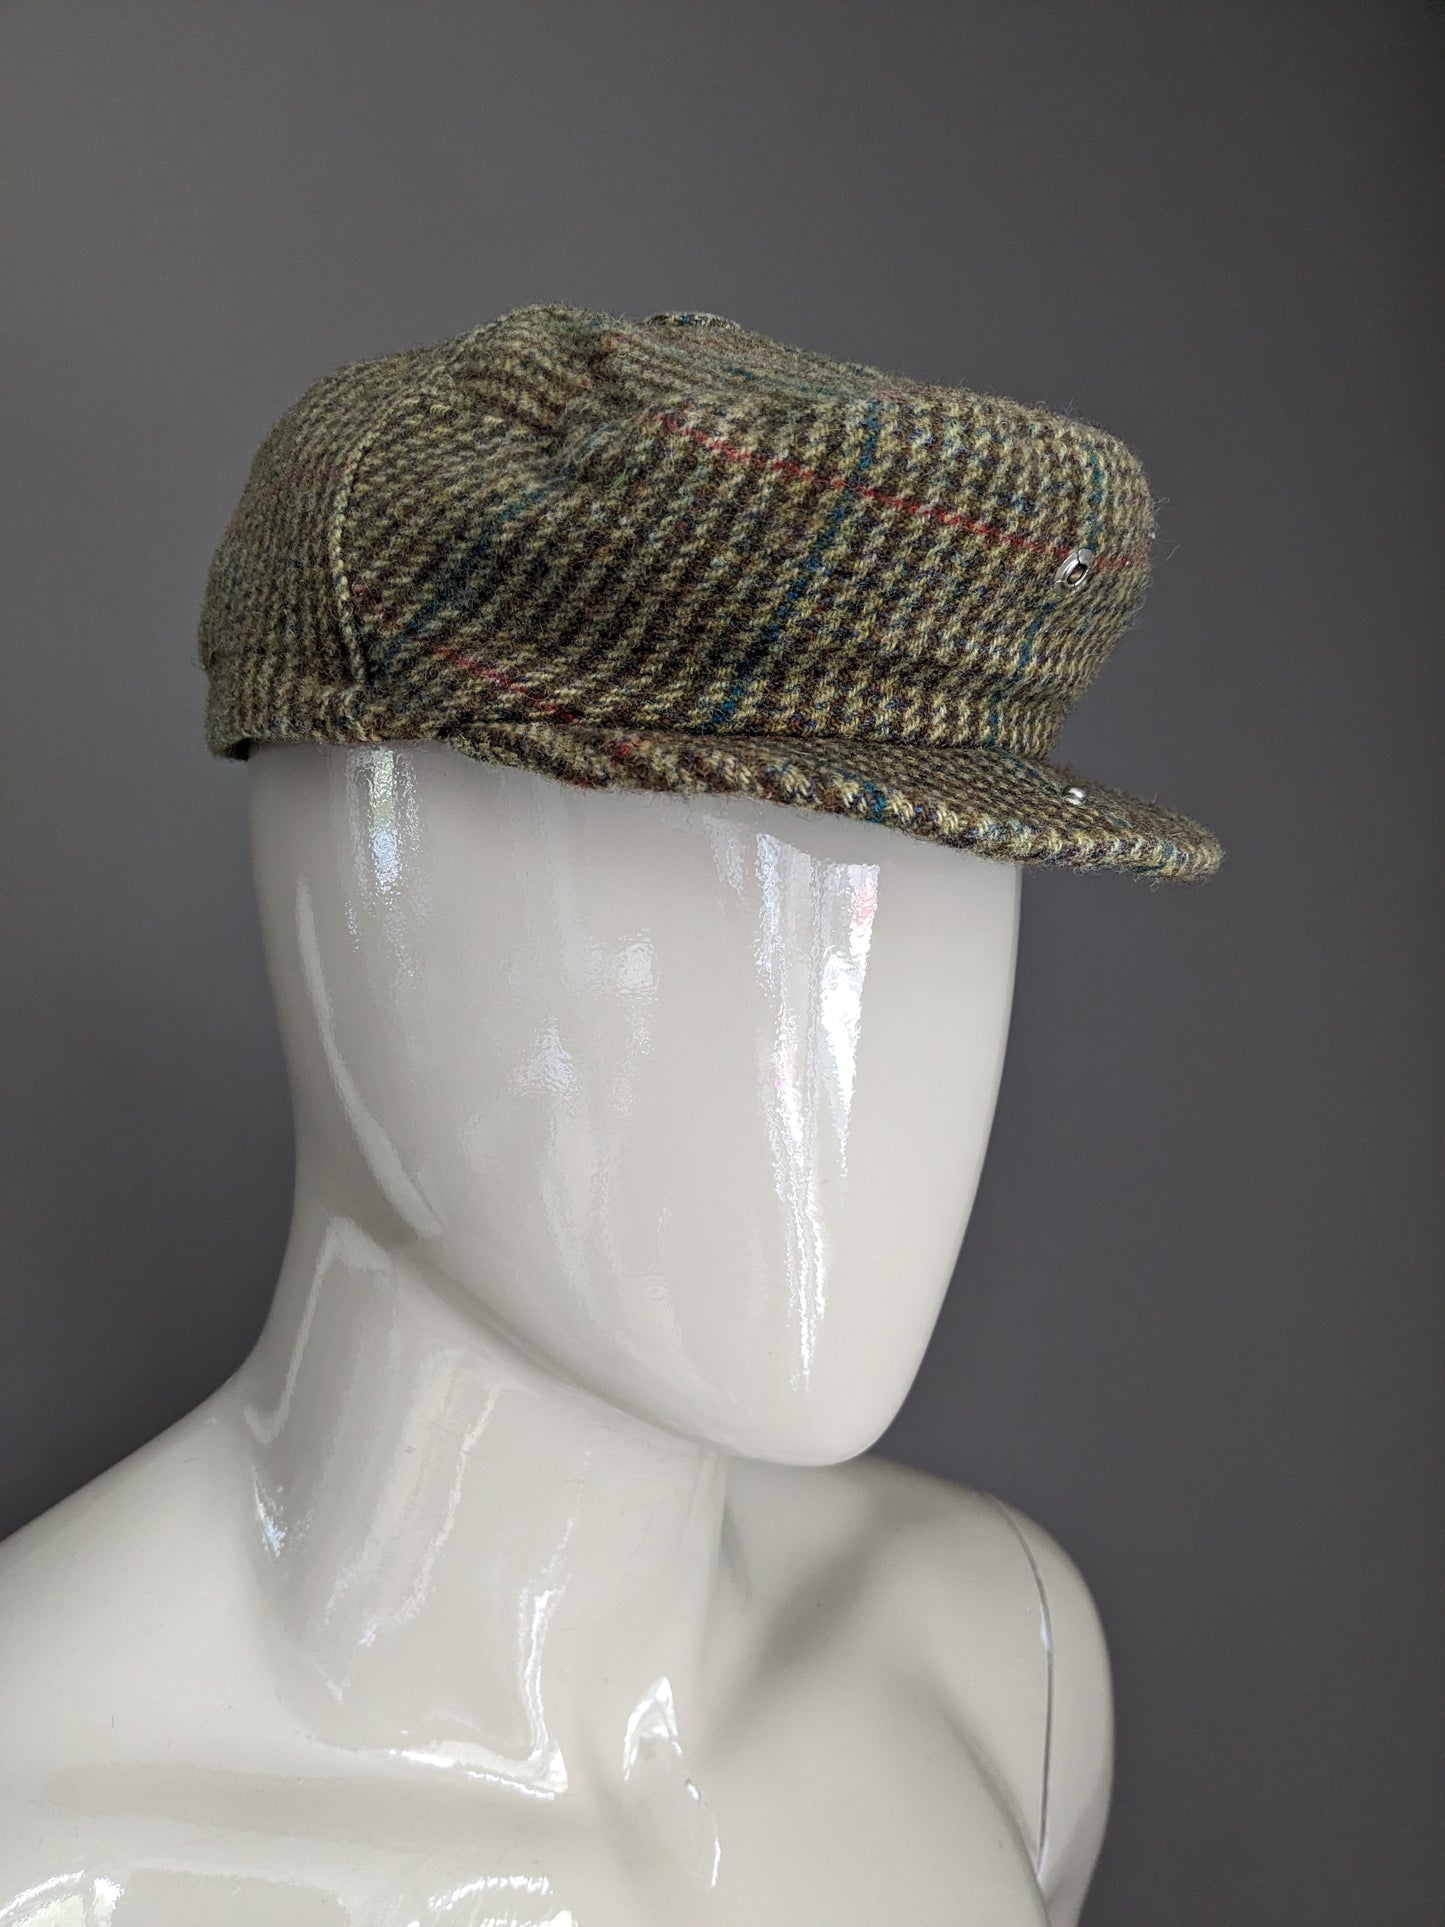 Vintage John Hanly & Co woolen flat cap / cap. Brown green blue red checked. 56 cm circumference.